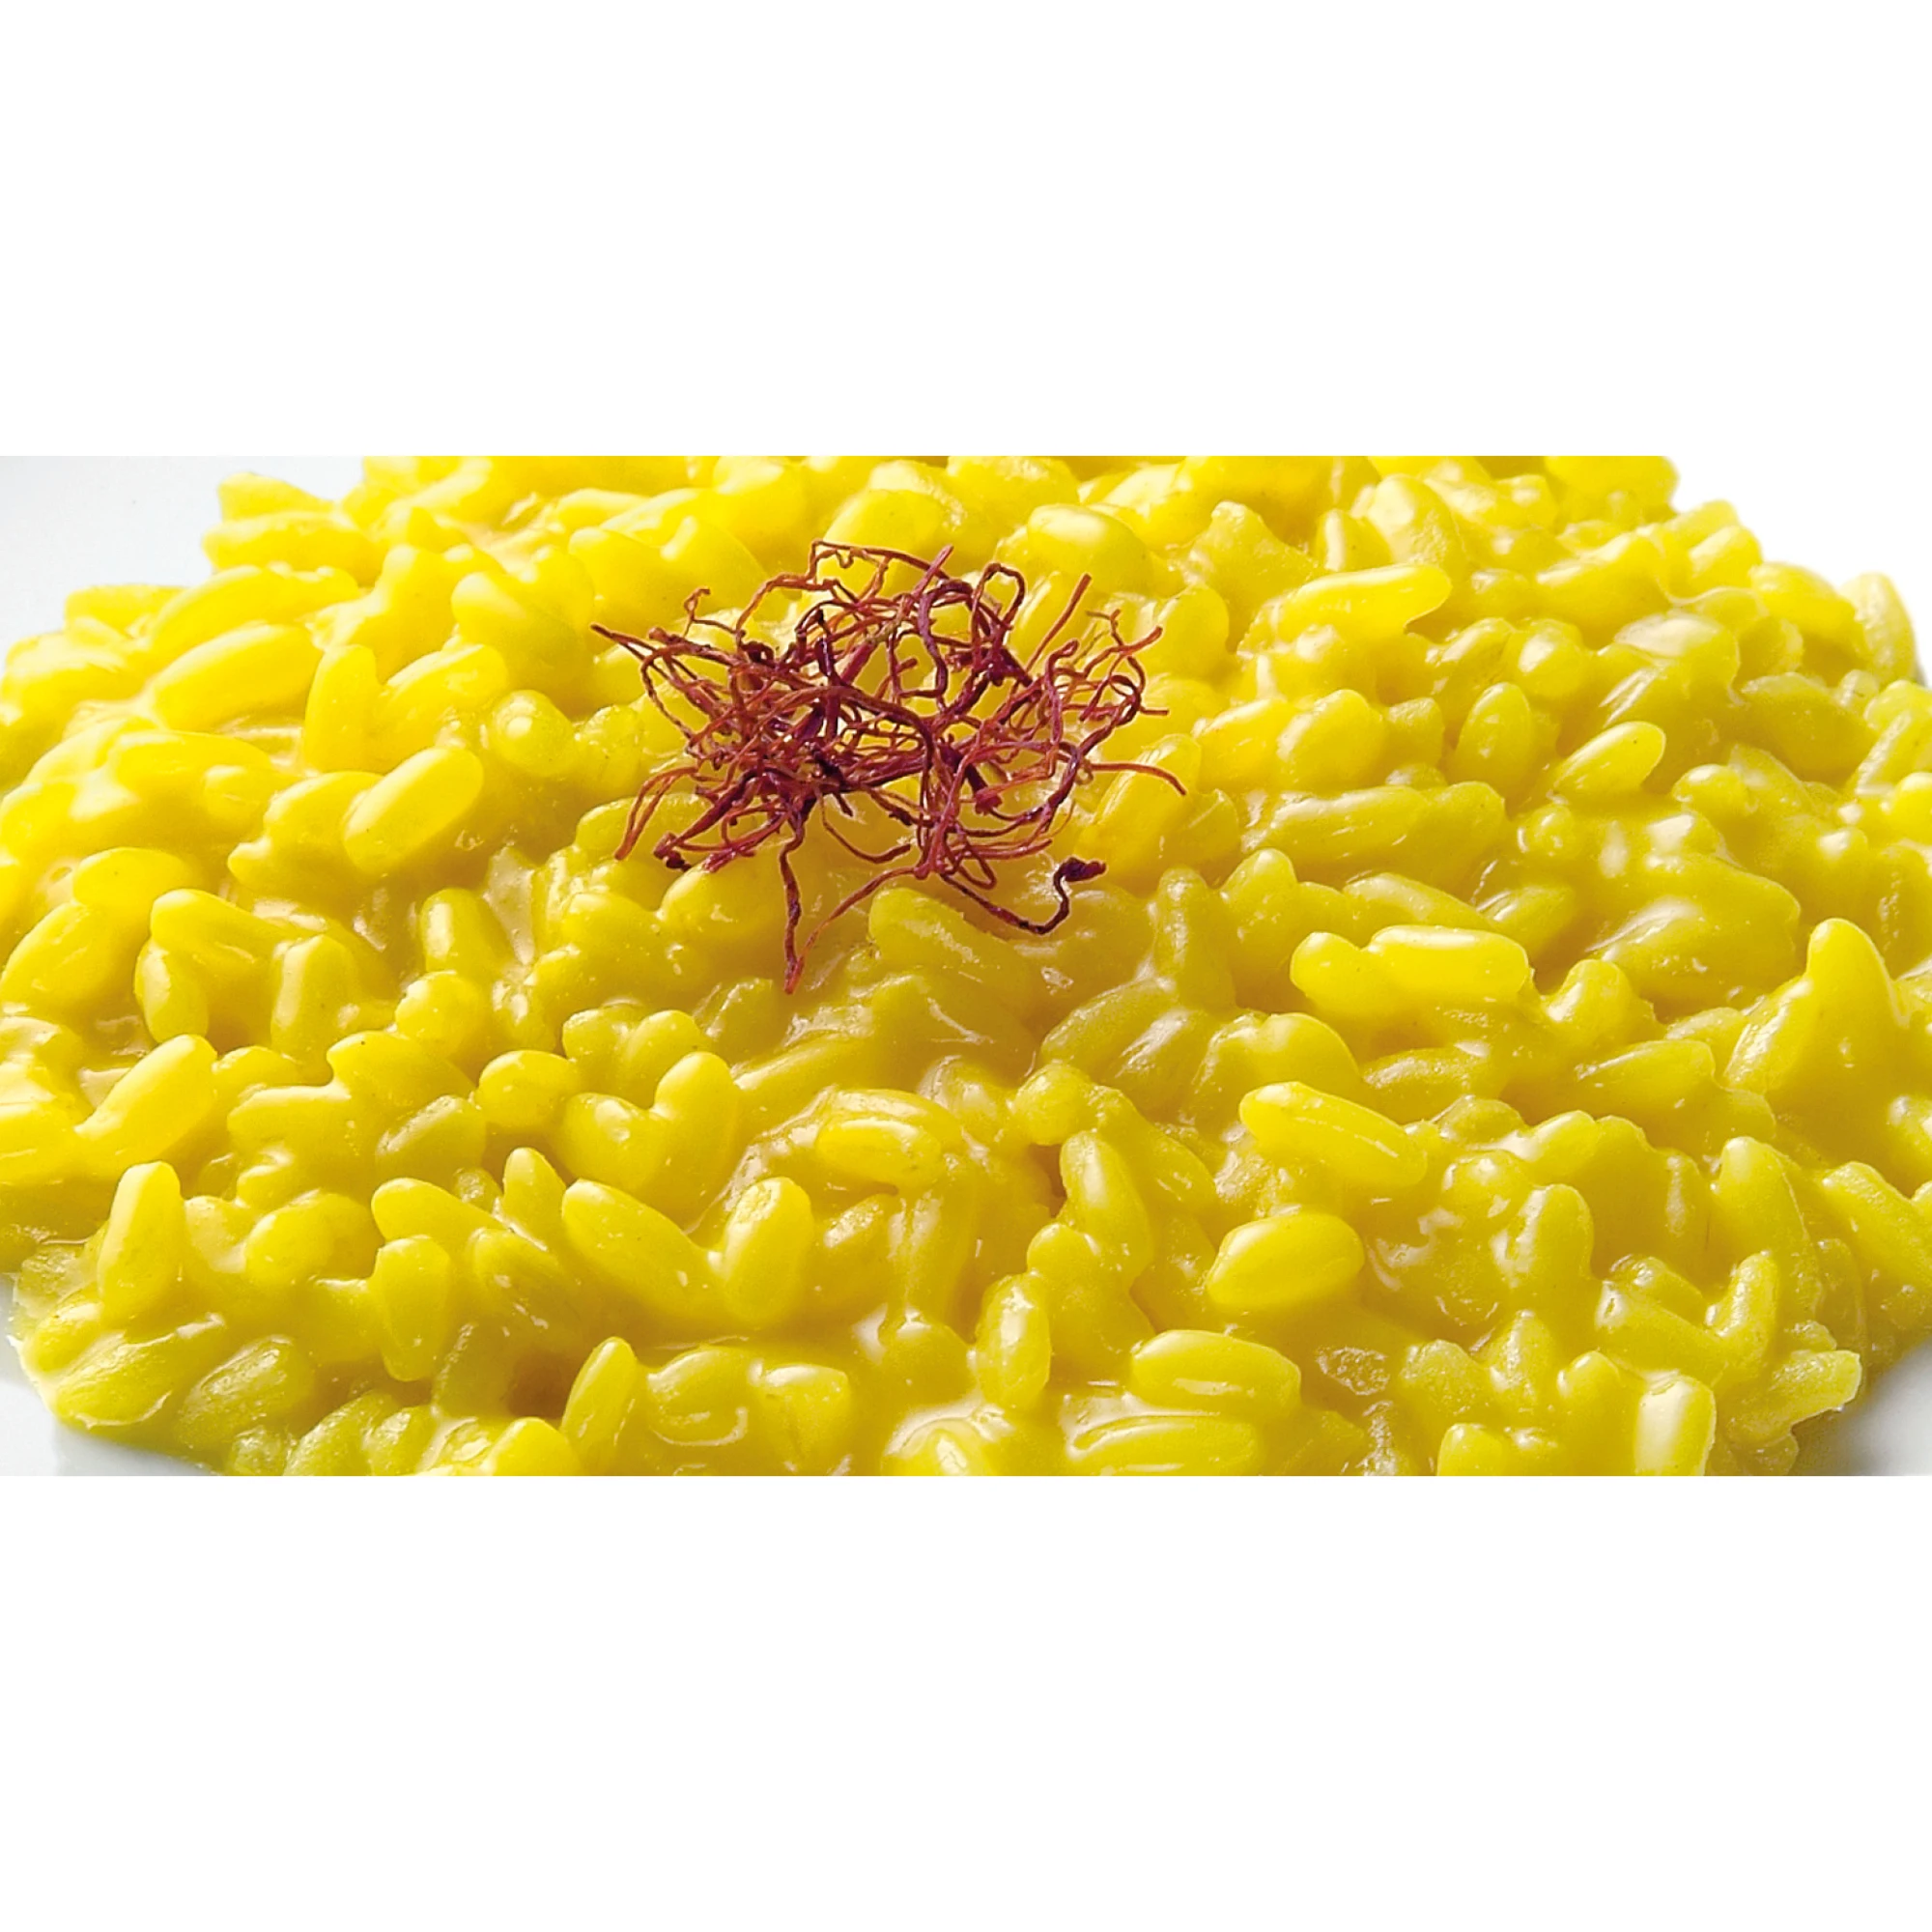 HighQuality Ready to eat Rice Gourmet Instant Rice Saffron Risotto 300 gr. (11000000486272)